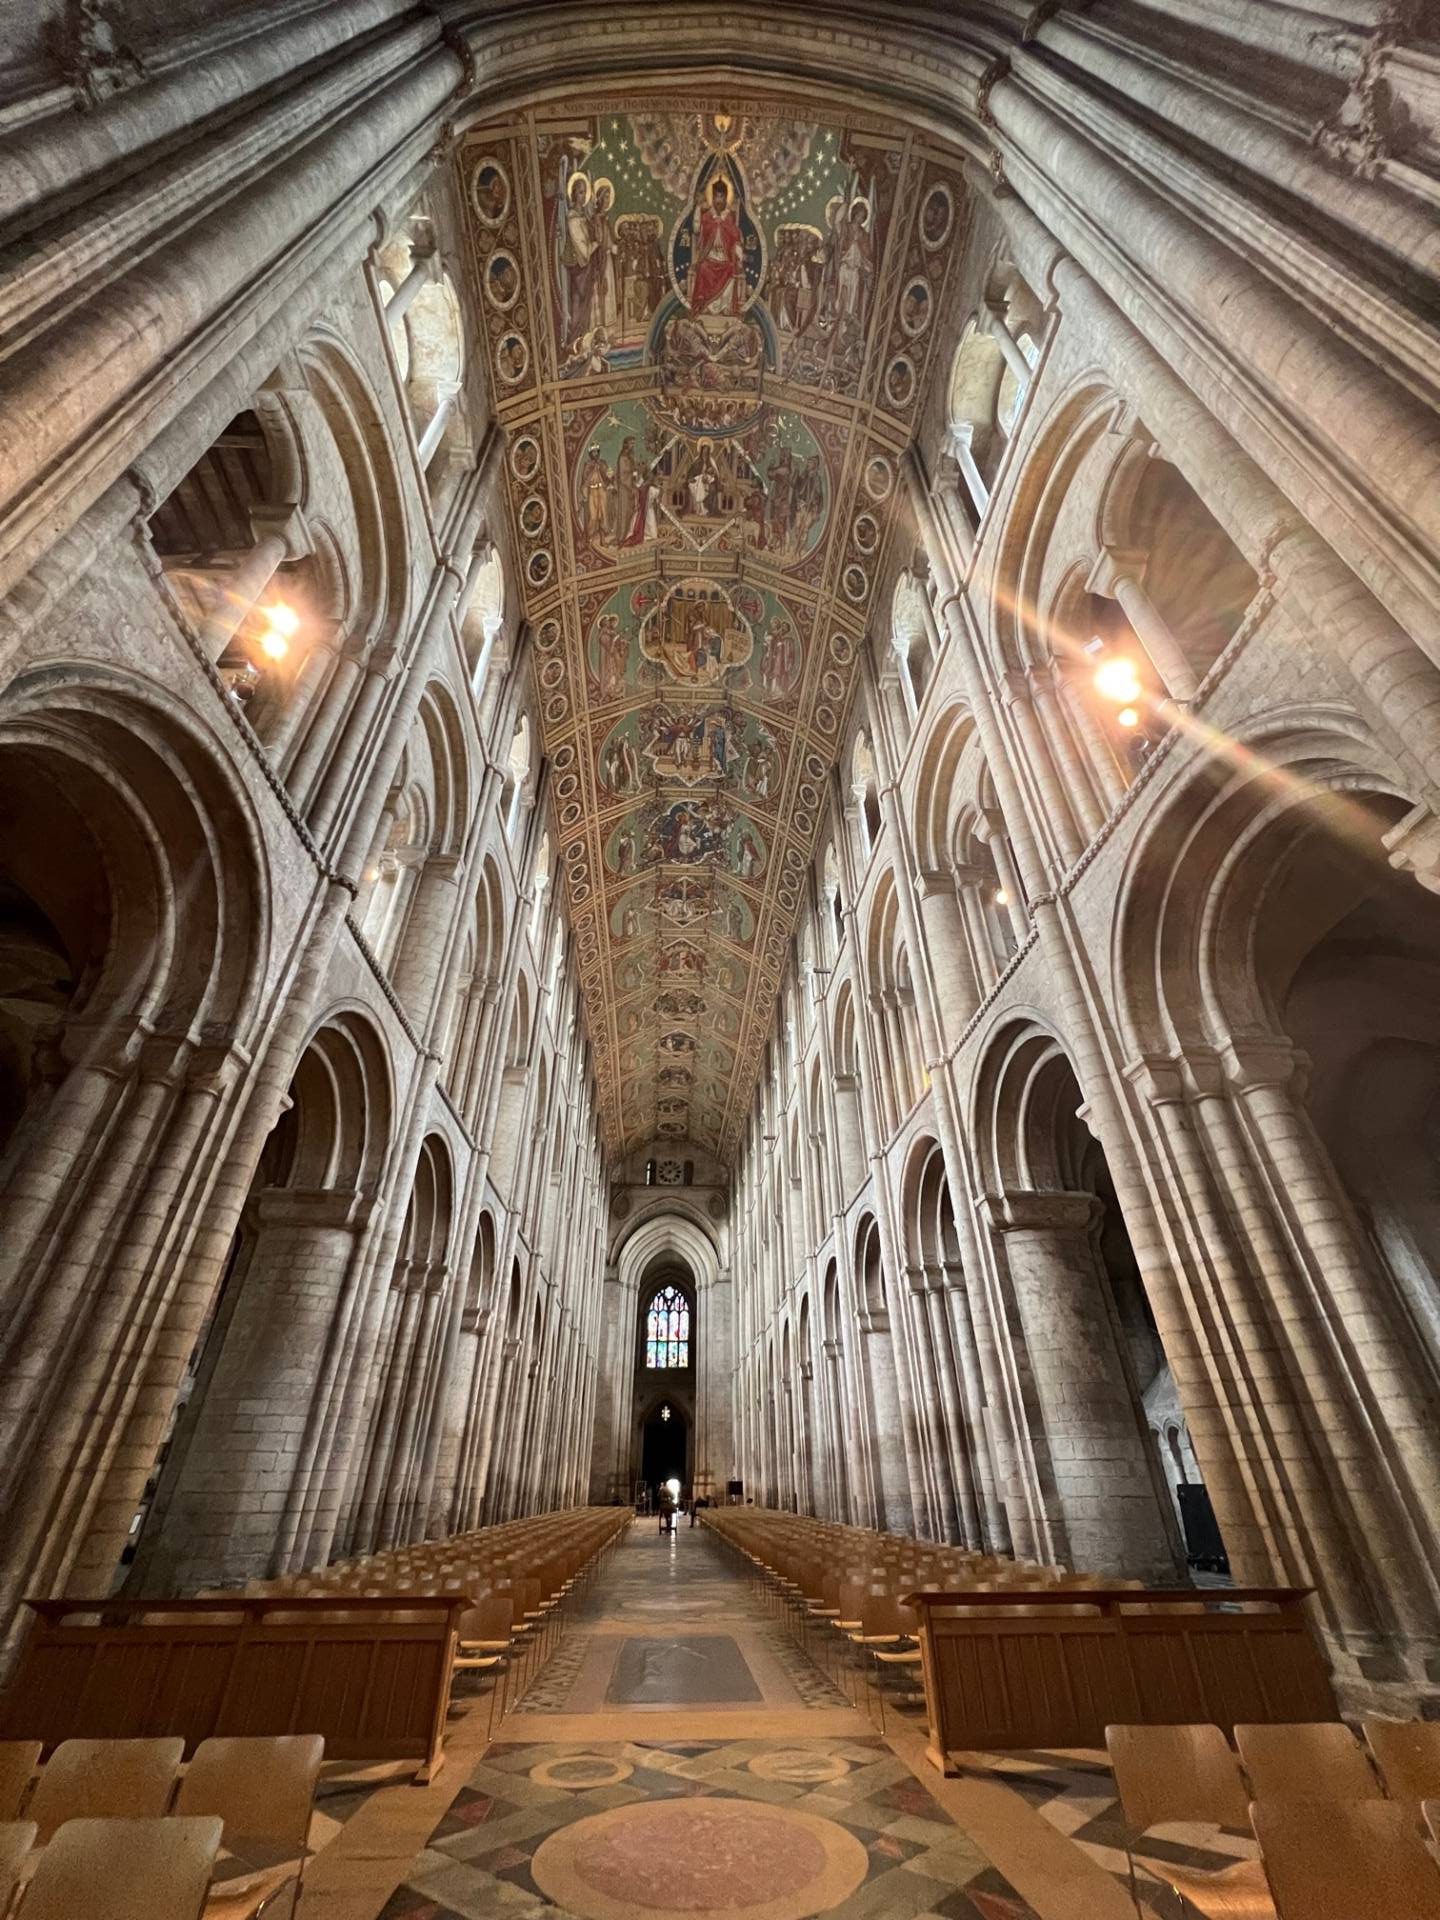 Up shot of a nave of a cathedral